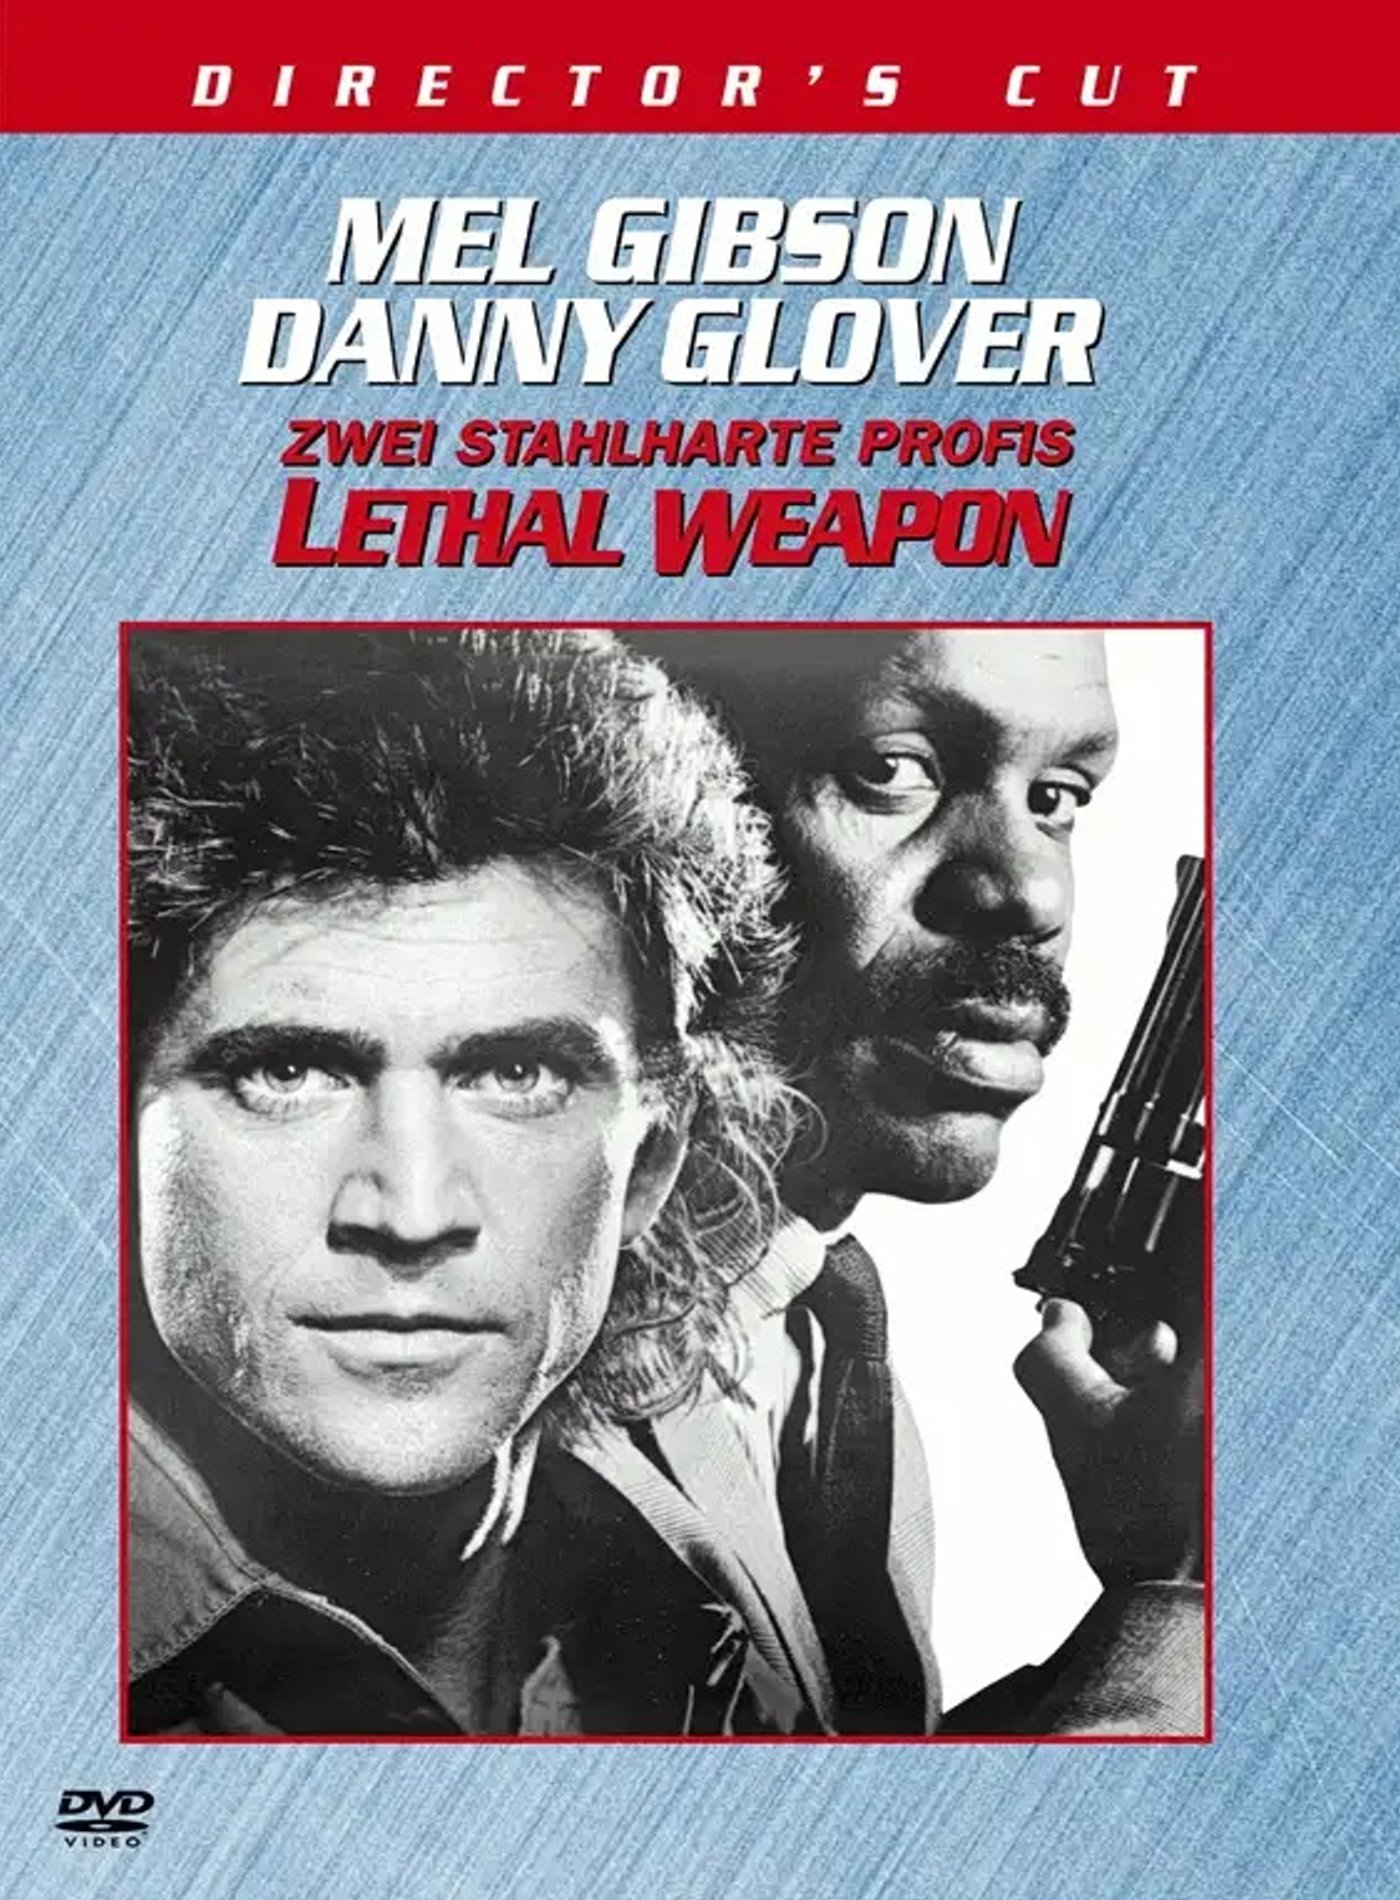 Cover - Lethal Weapon - Zwei stahlharte Profis.jpg